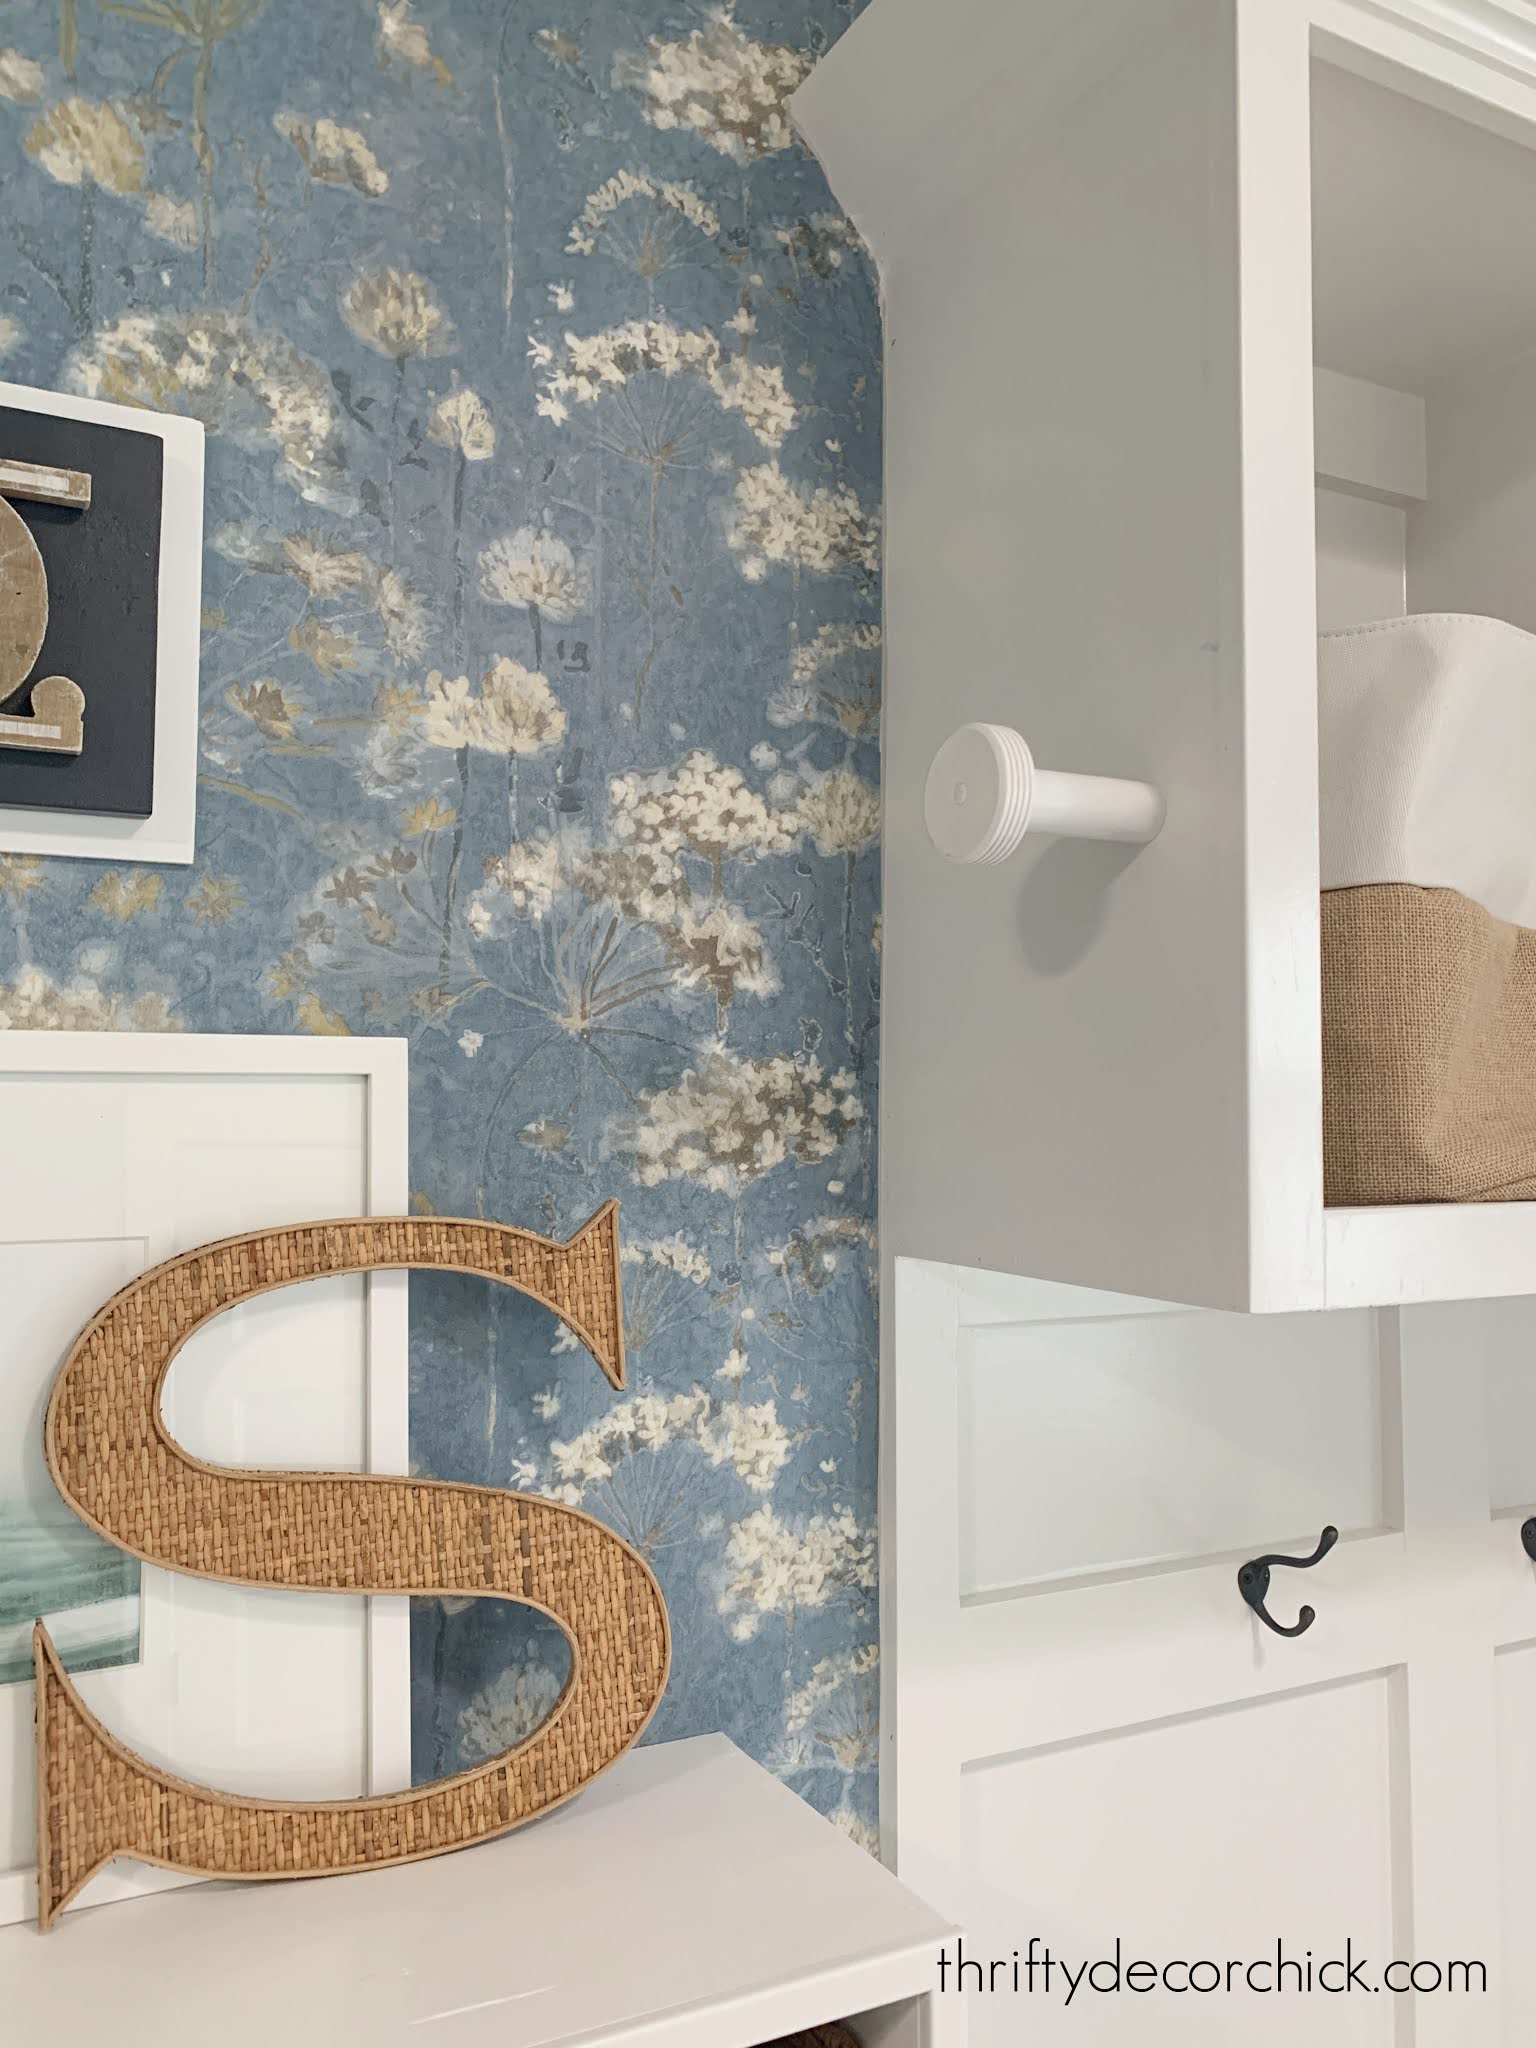 Before & After: A Wallpaper Makeover Lends “Vintage Vibes” to a Thrifted  Trunk